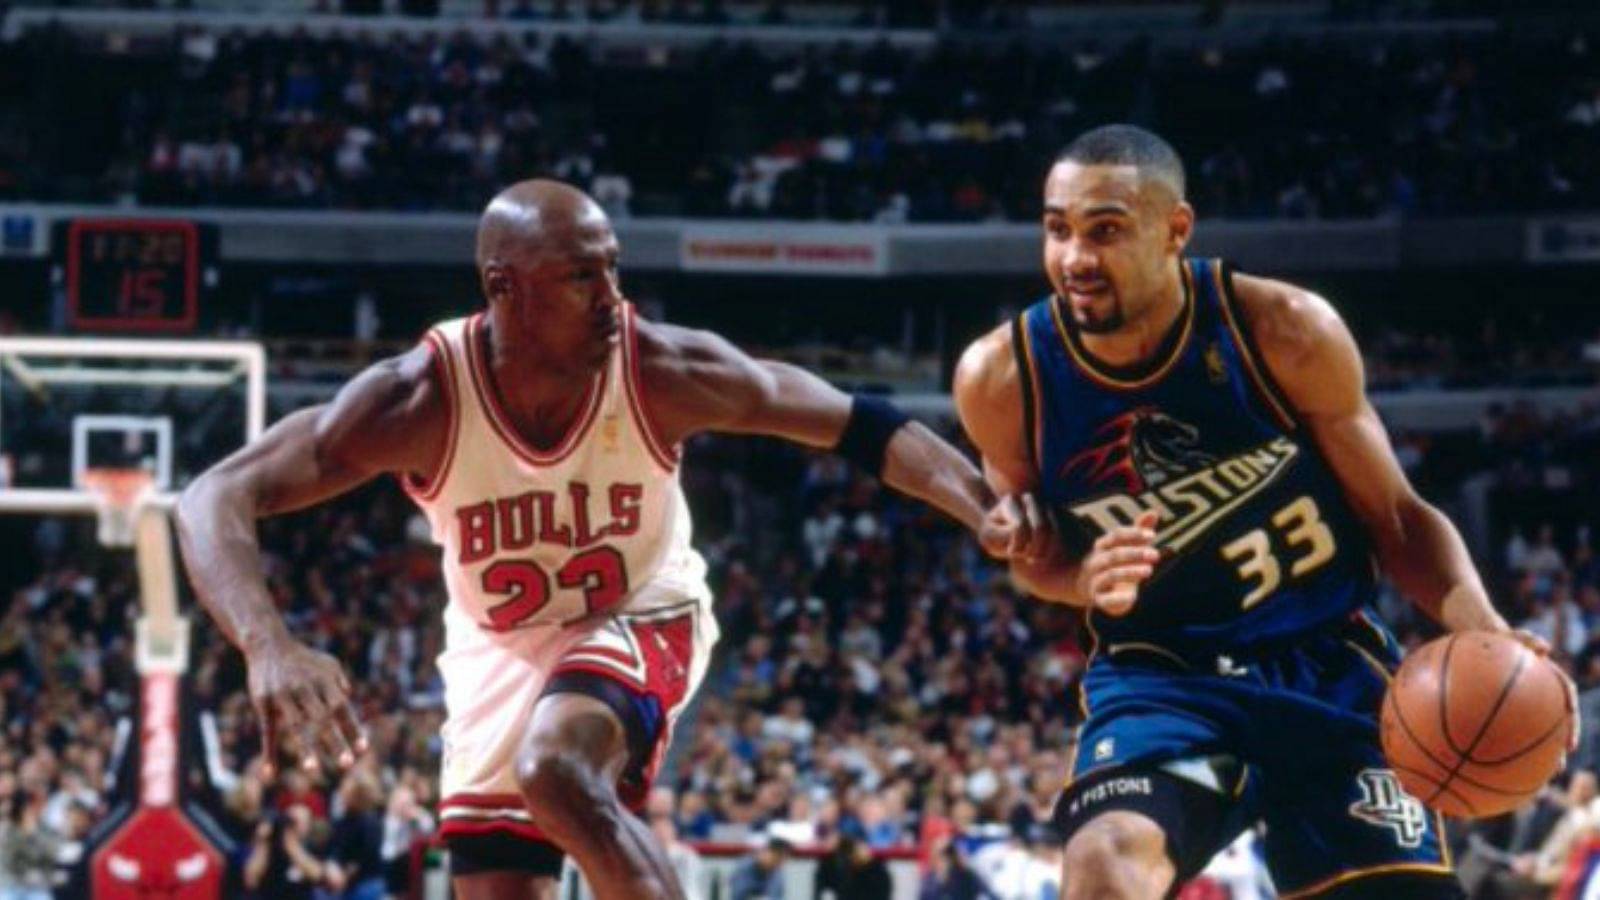 “They were calling me the next Michael Jordan, I thought it was foolish, but I leveraged that”: How Grant Hill turned the huge pressure into opportunity in the absence of His Airness